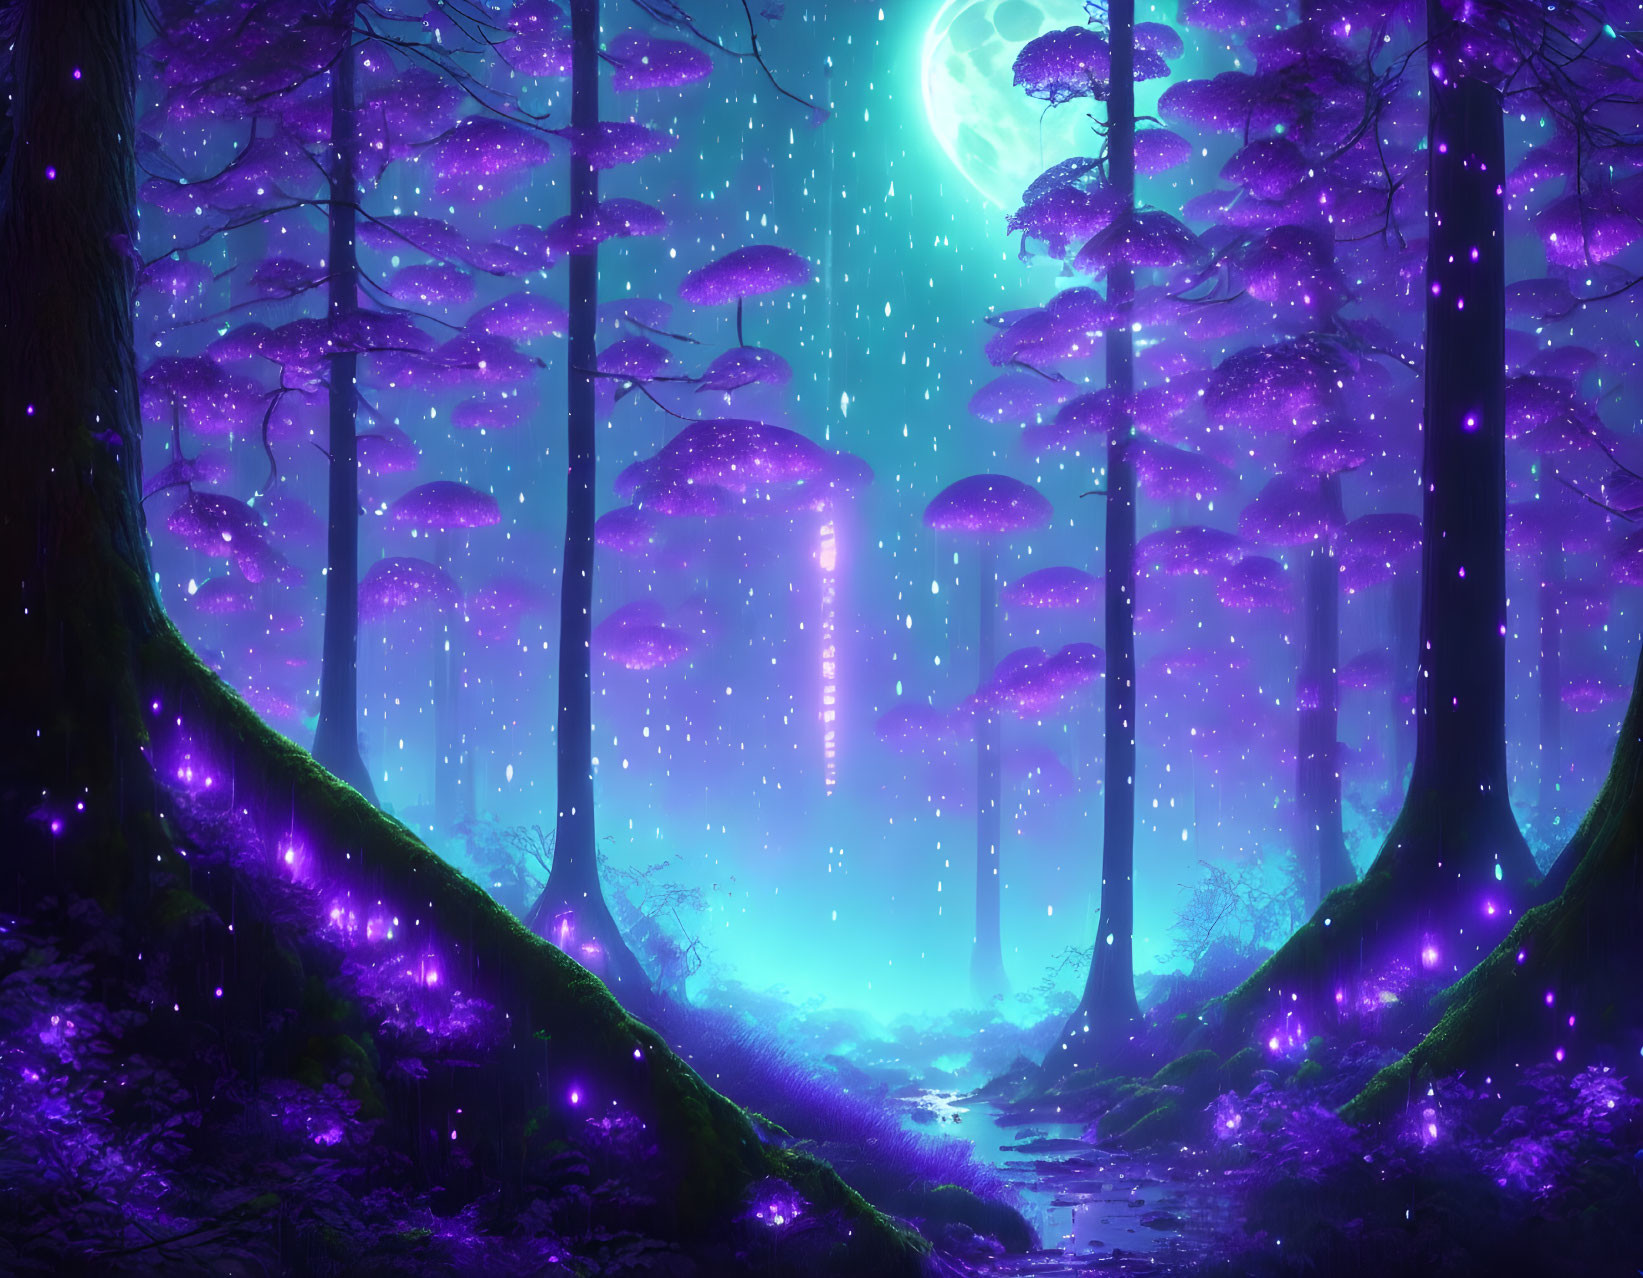 Enchanting forest with glowing purple mushrooms and swirling galaxy under starry sky